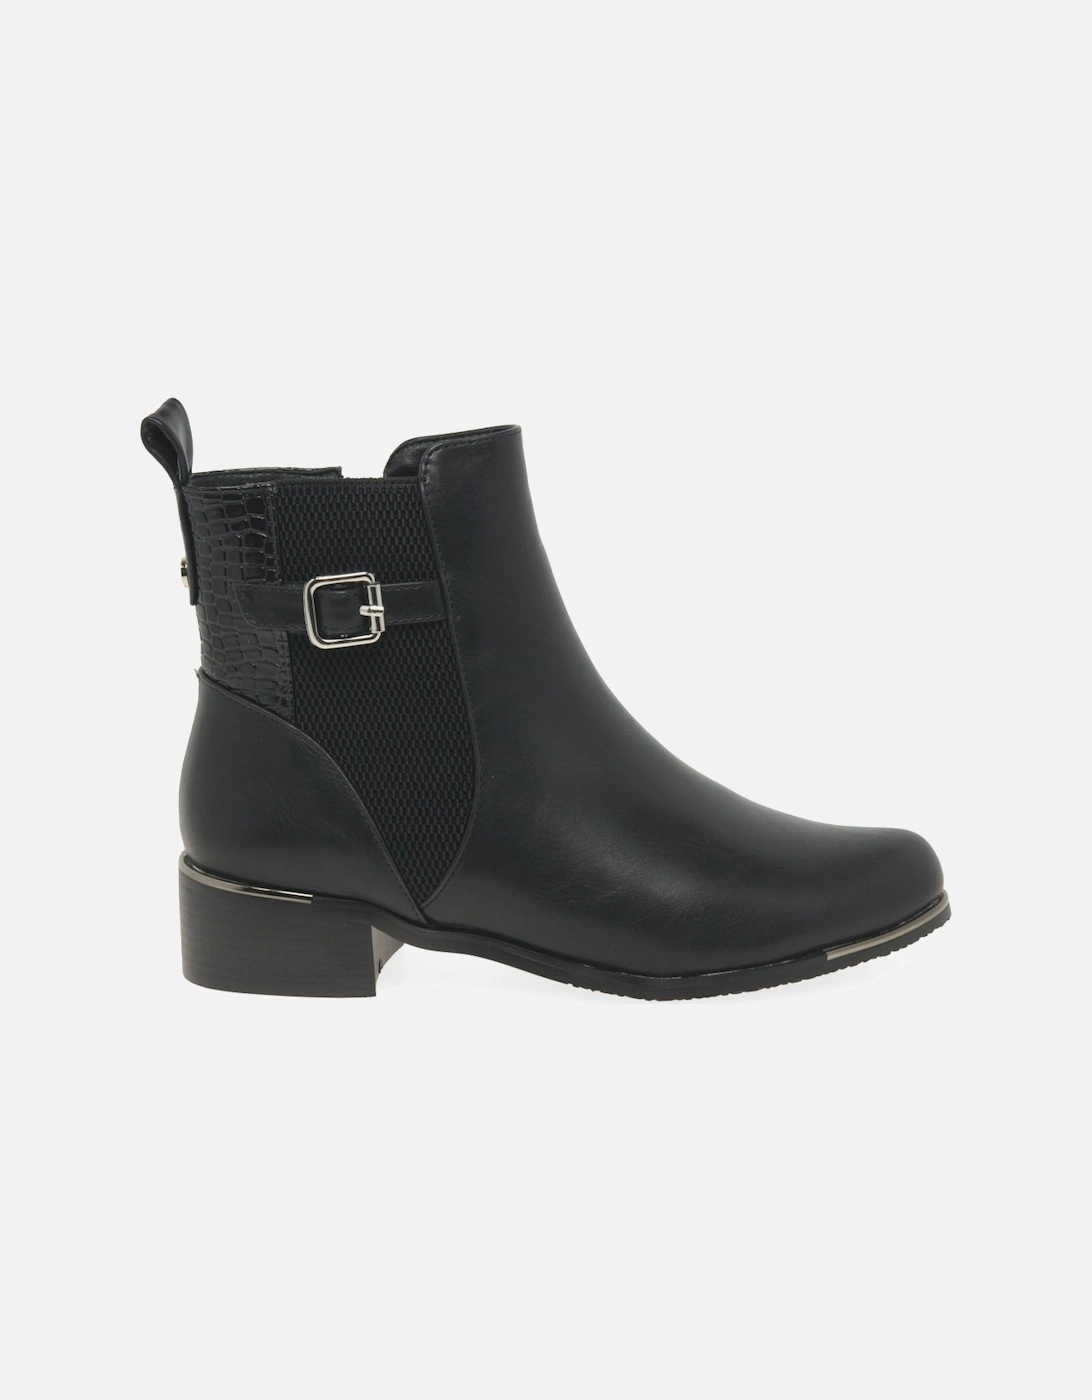 Wyatt Womens Ankle Boots